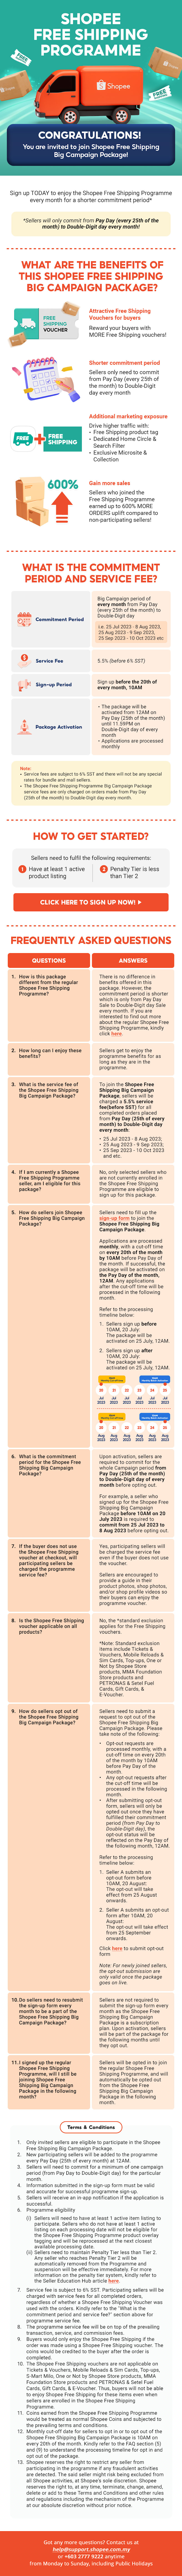 SHOPEE FREE SHIPPING BIG CAMPAIGN PACKAGE